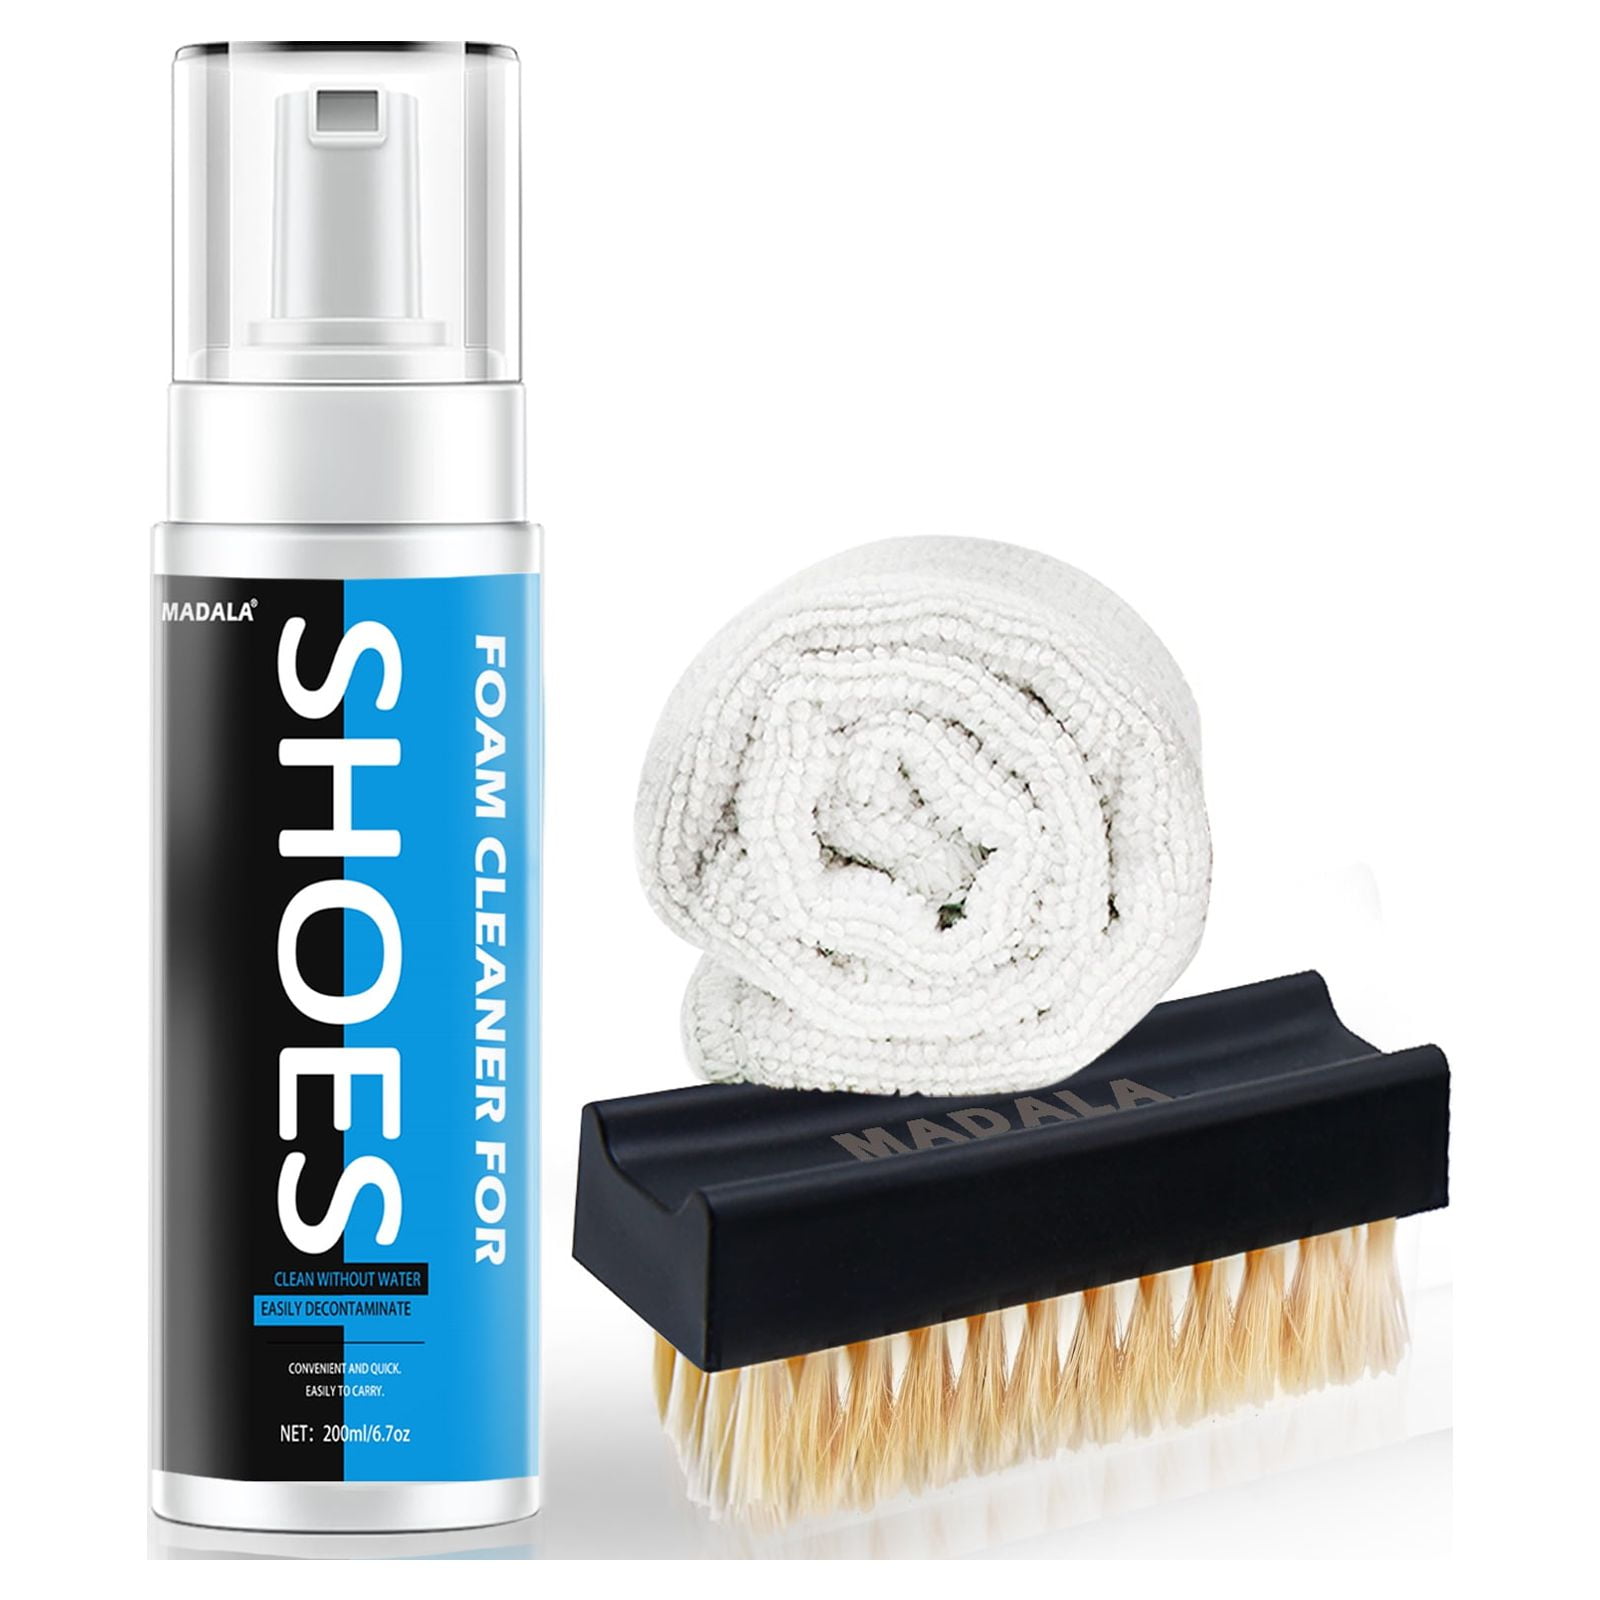 Choose the Best Shoe Cleaning Solution, Premium Shoe Cleaner Kit Brush and  Solution